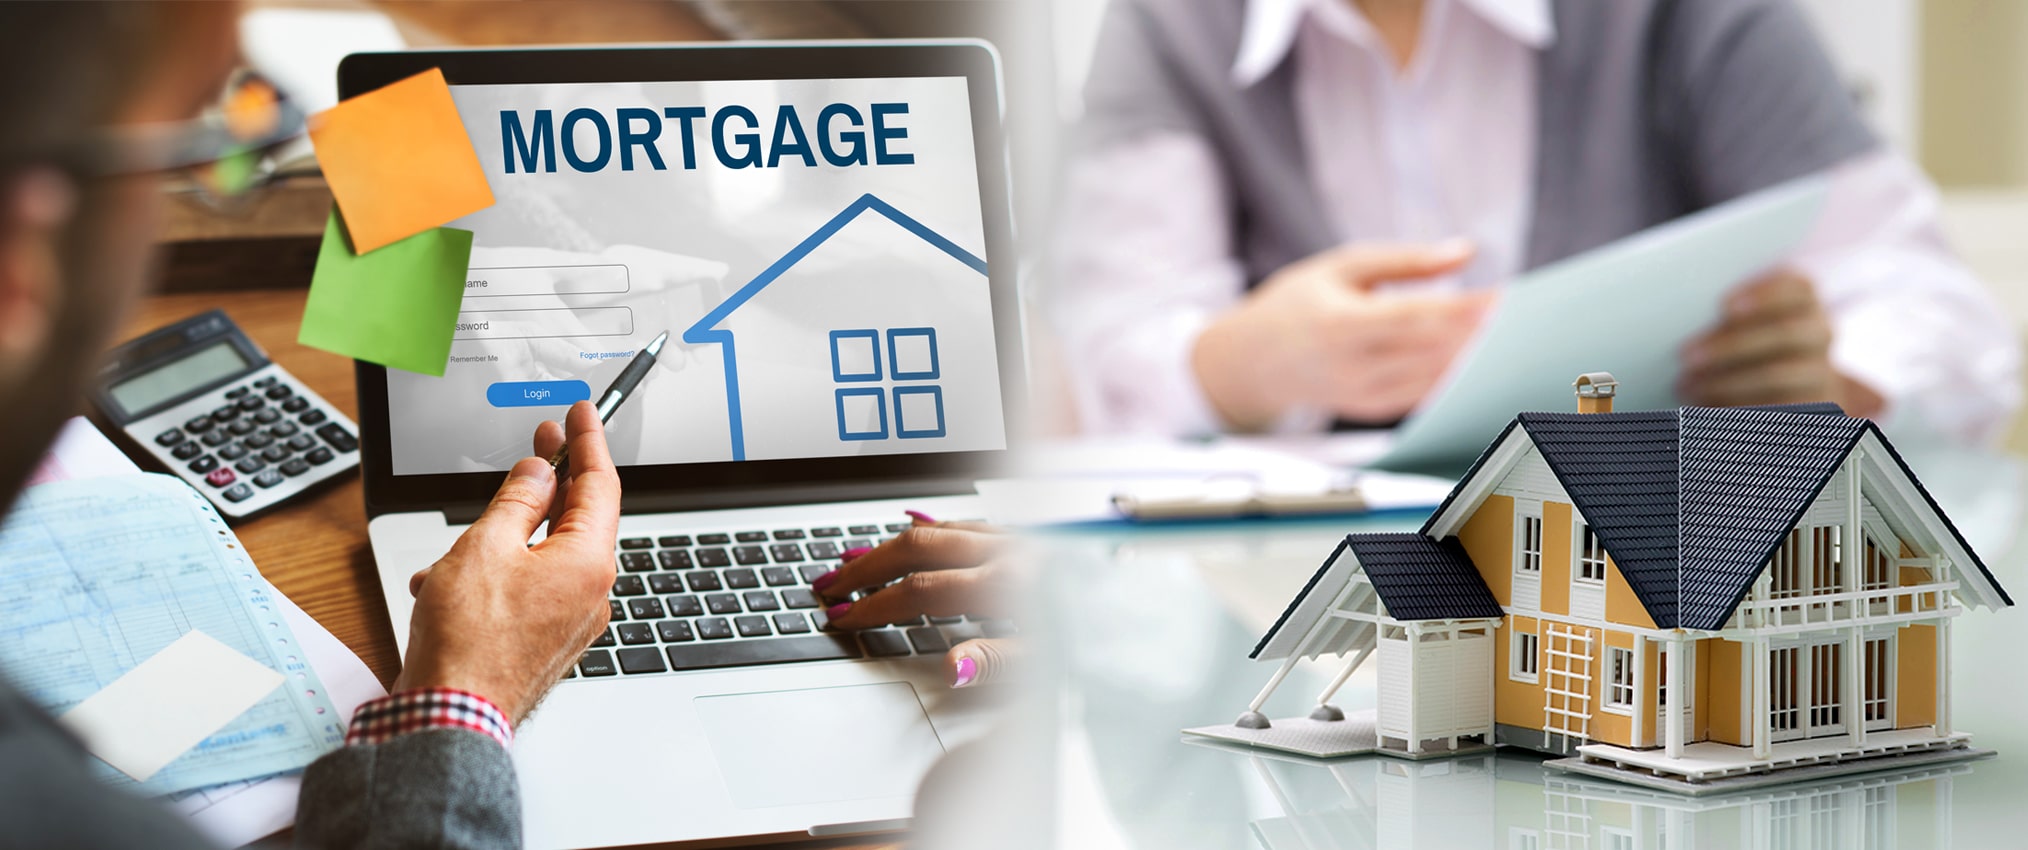 Mortgage Data Entry services